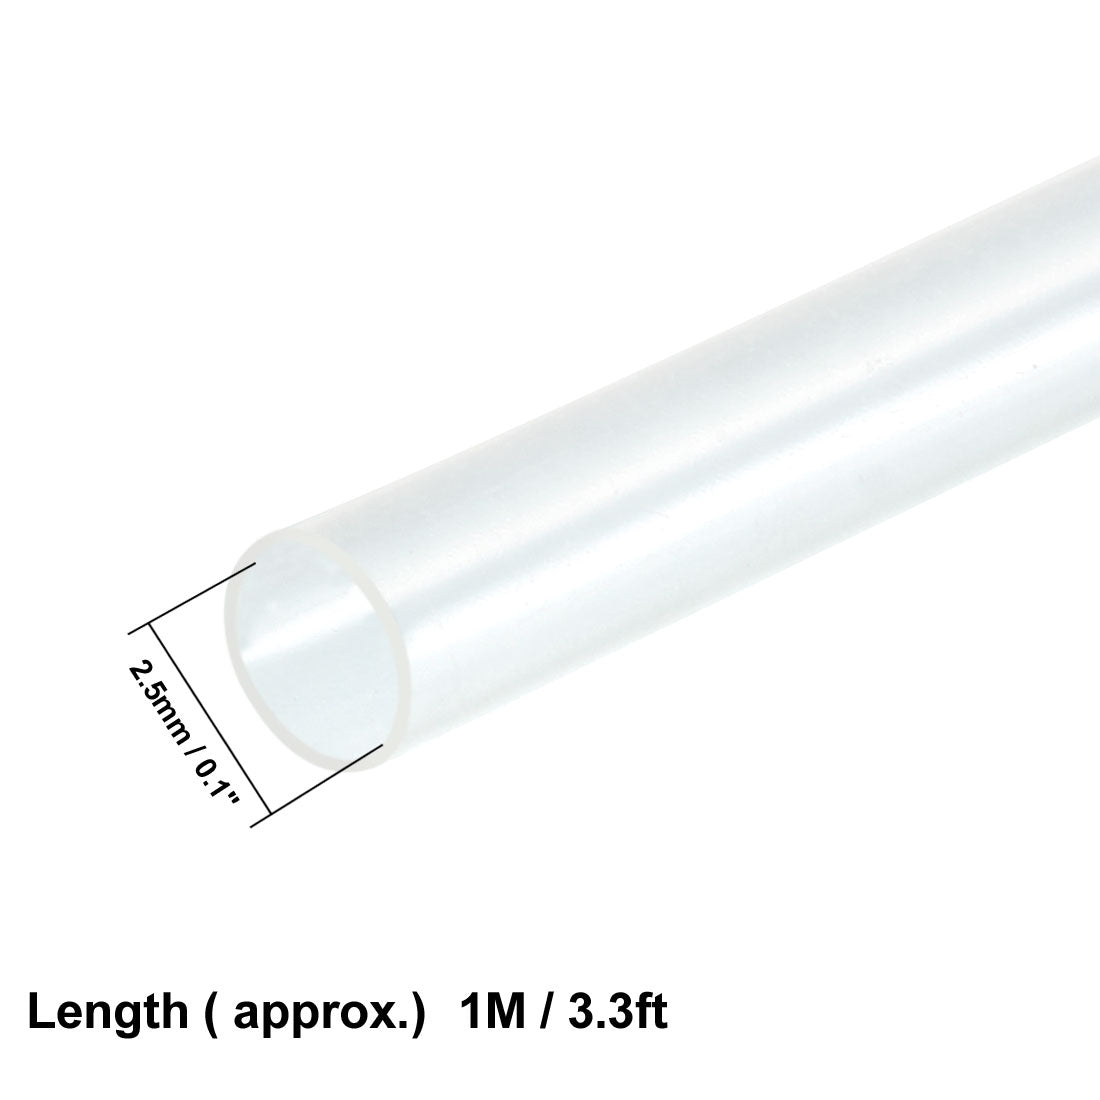 uxcell Uxcell Heat Shrink Tube 2:1 Electrical Insulation Tube Wire Cable Tubing Sleeving Wrap Clear 2.5mm Diameter 1m Long